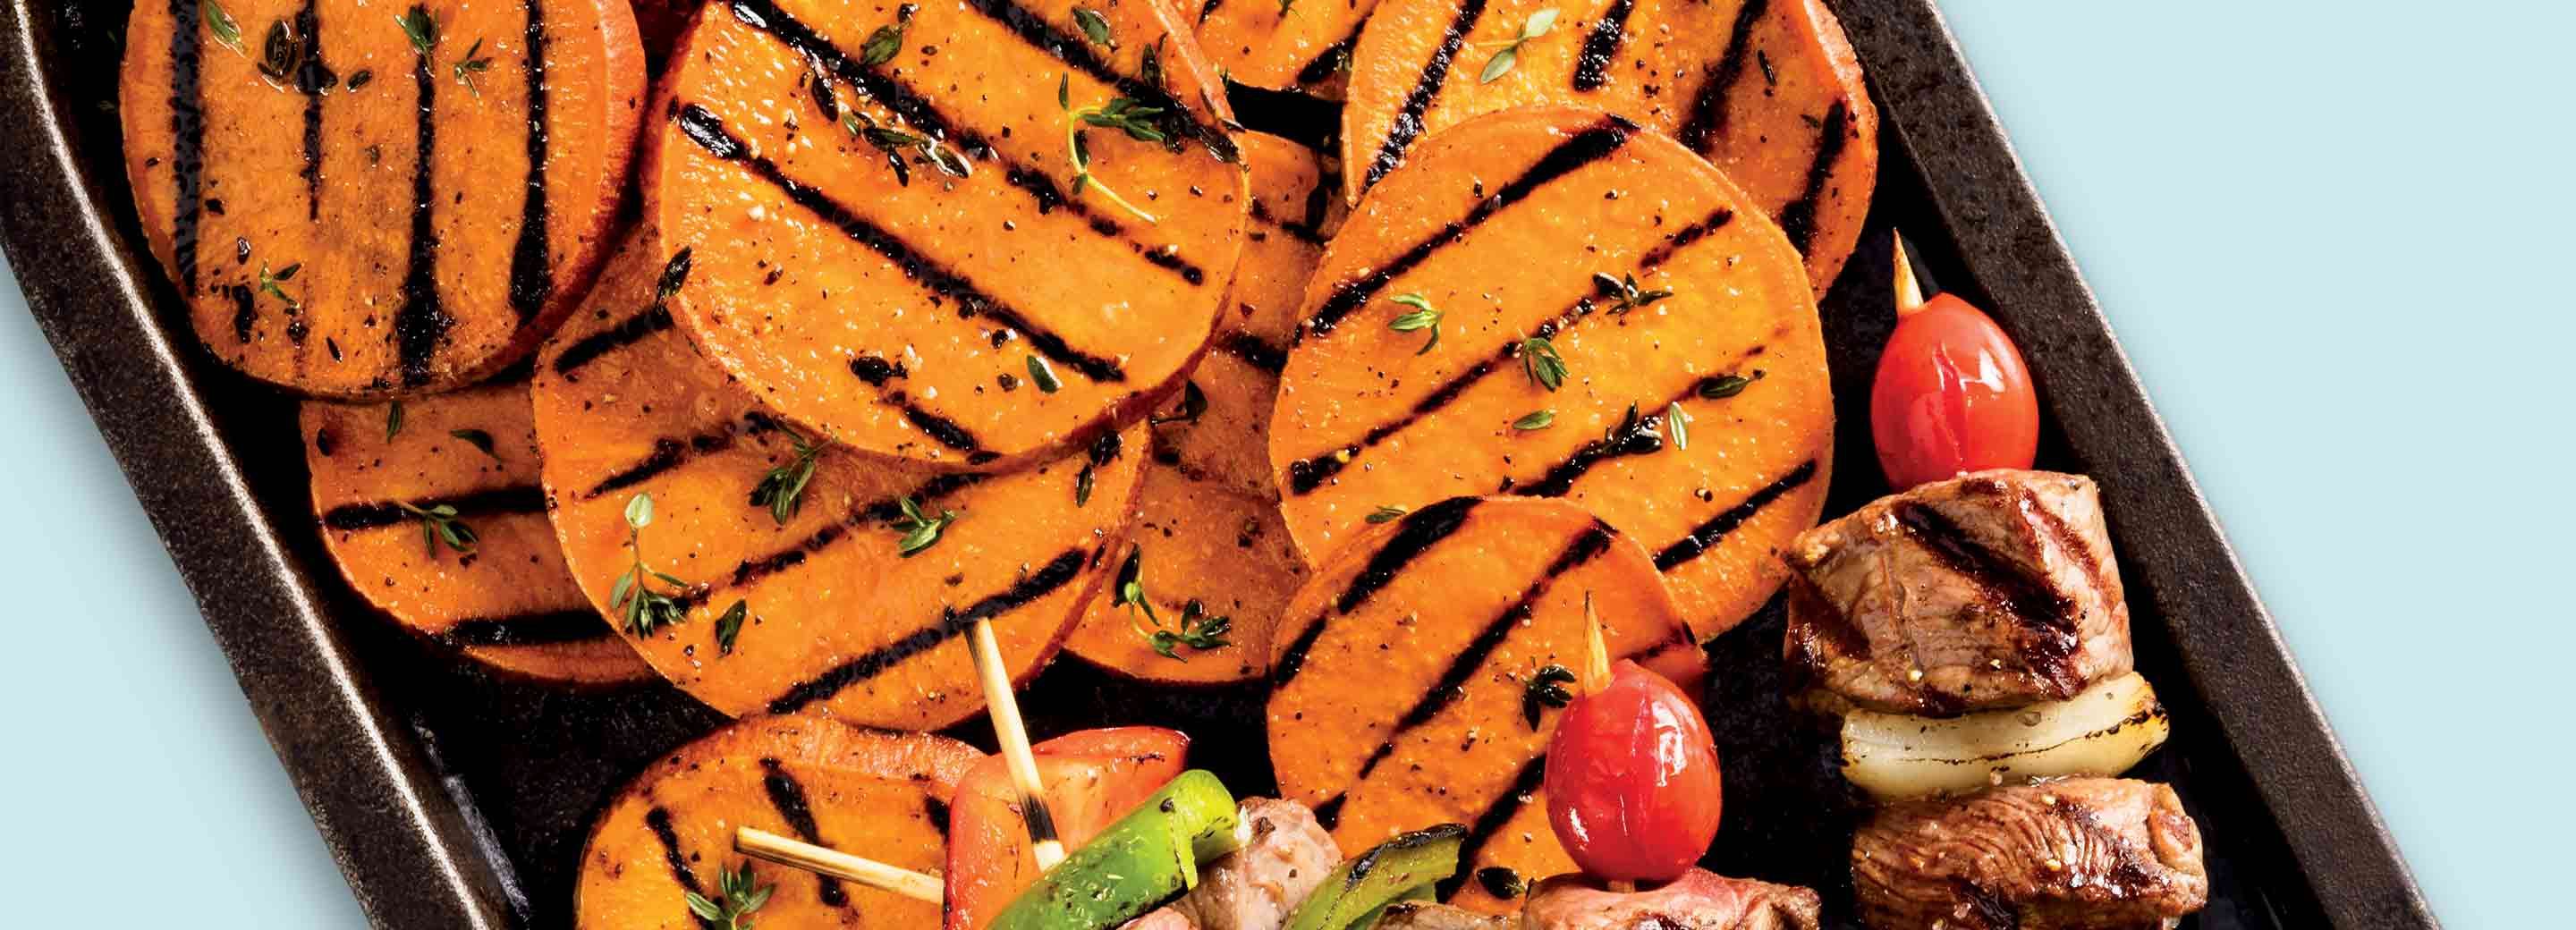 Thyme and Garlic Grilled Sweet Potato Slices